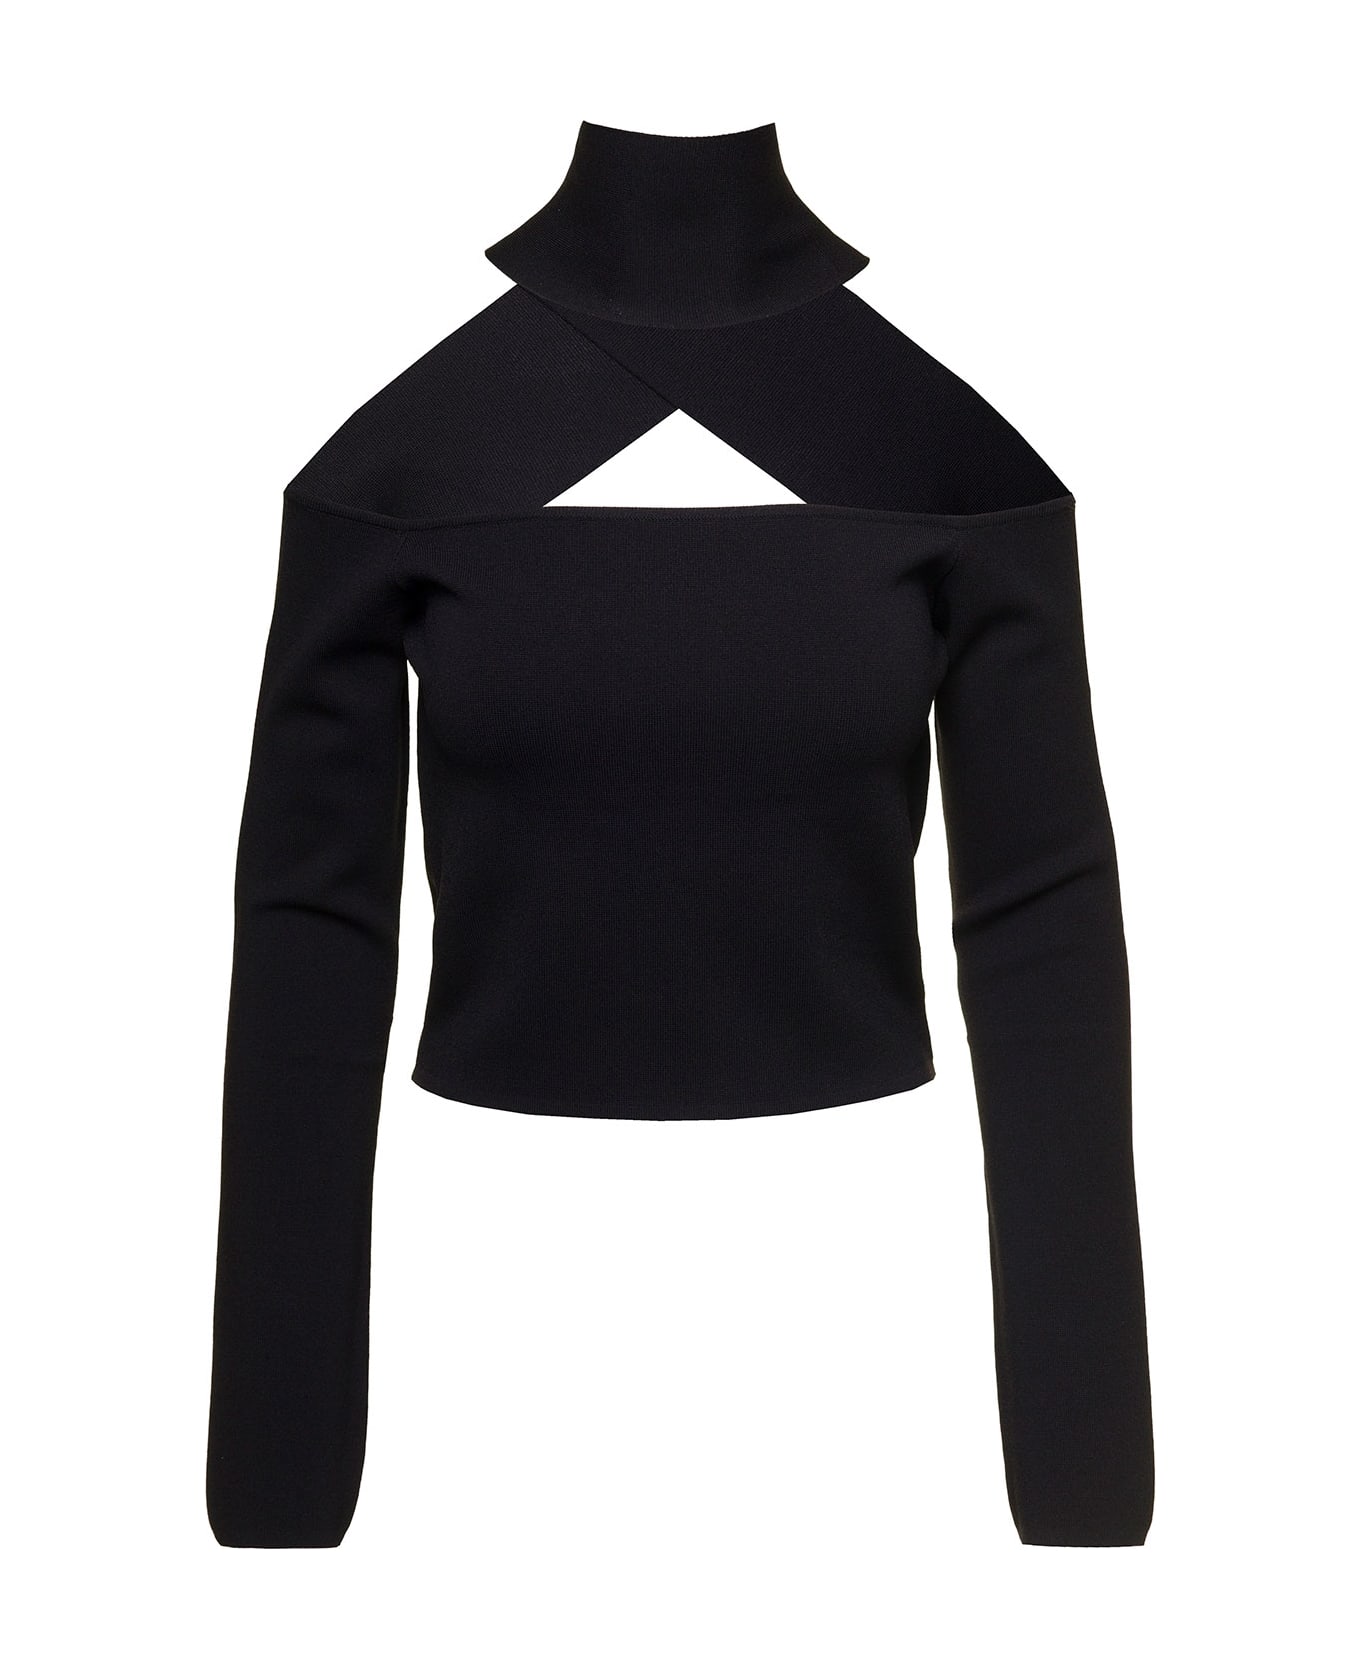 GAUGE81 'molins' Black Top With Choker Detail And Extra Long Sleeves In Rayon Blend Woman Gauge81 - Black